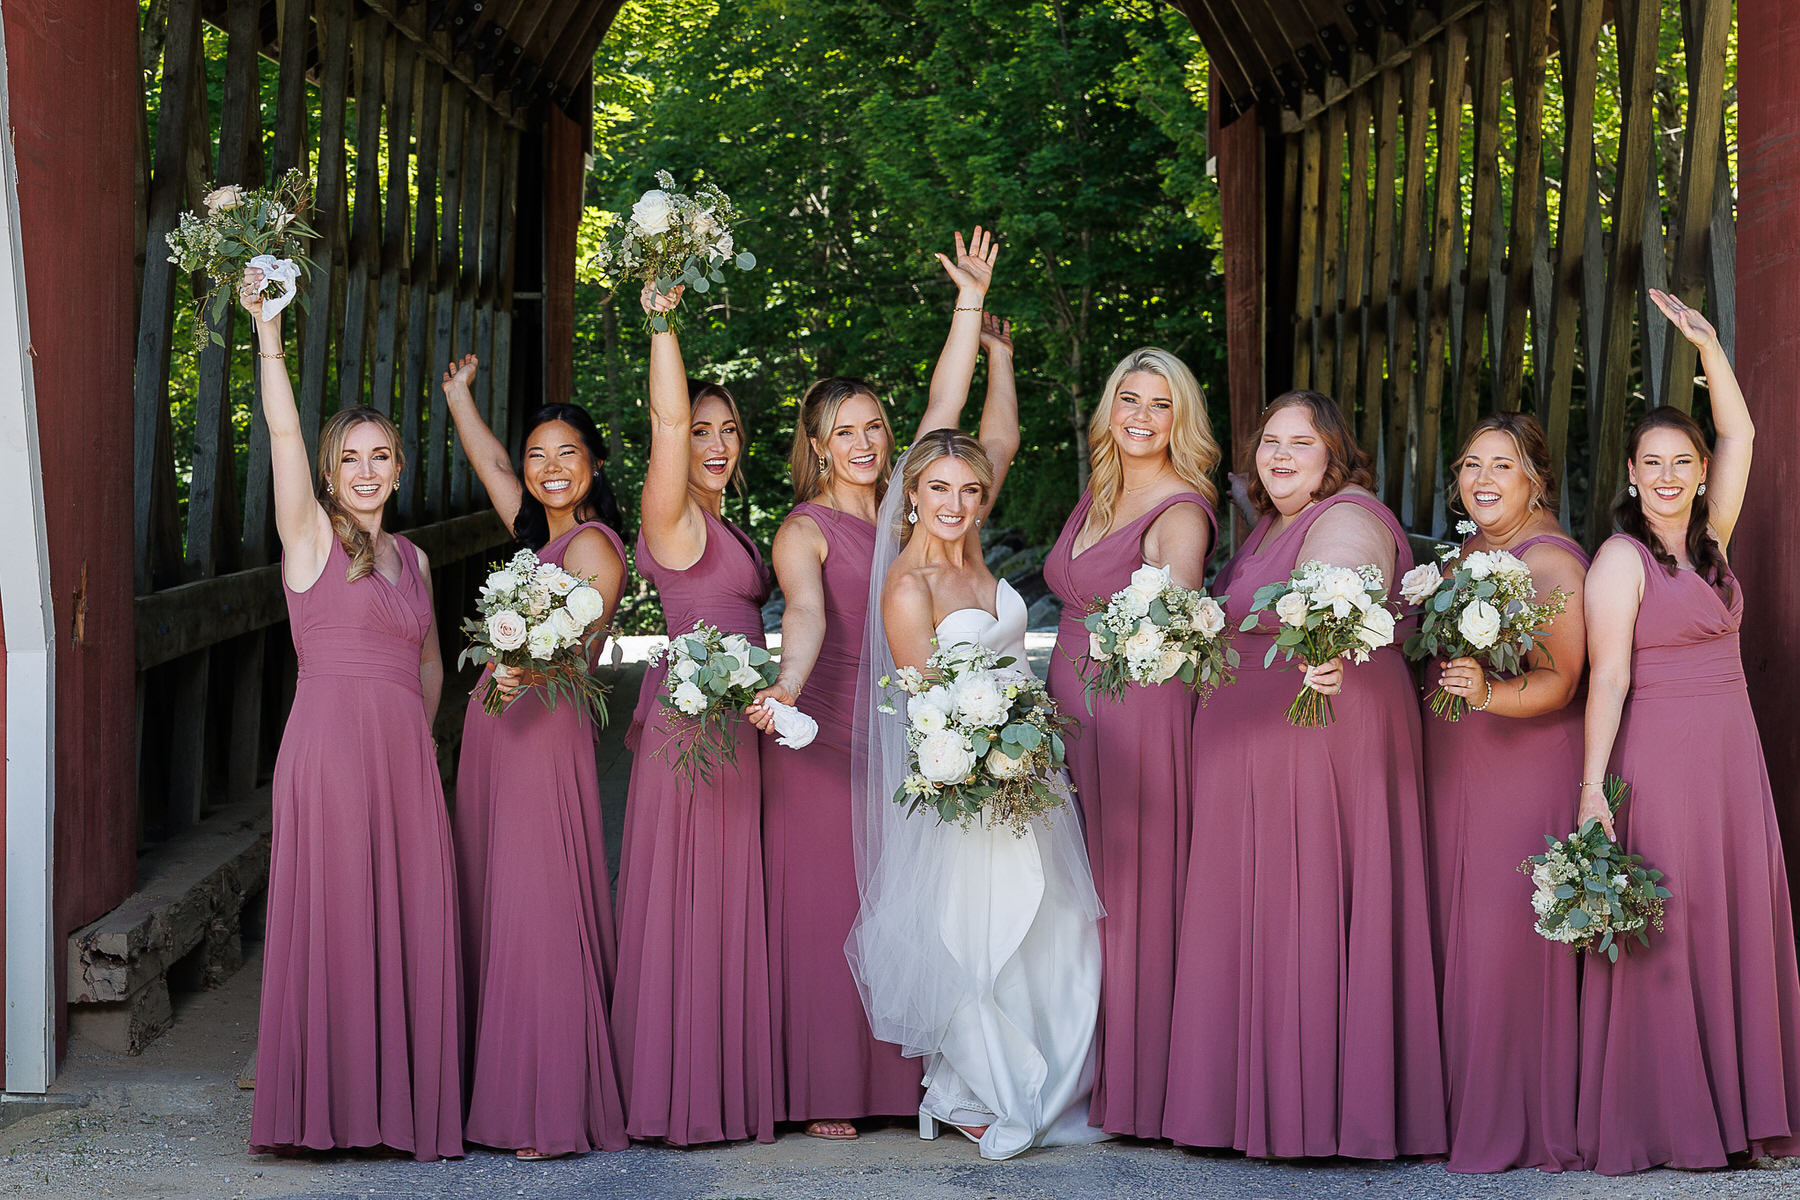 A bride and her bridesmaids, all in burgundy dresses except the bride in white, joyfully raising bouquets inside a wooden covered bridge, capturing optimal photography moments.